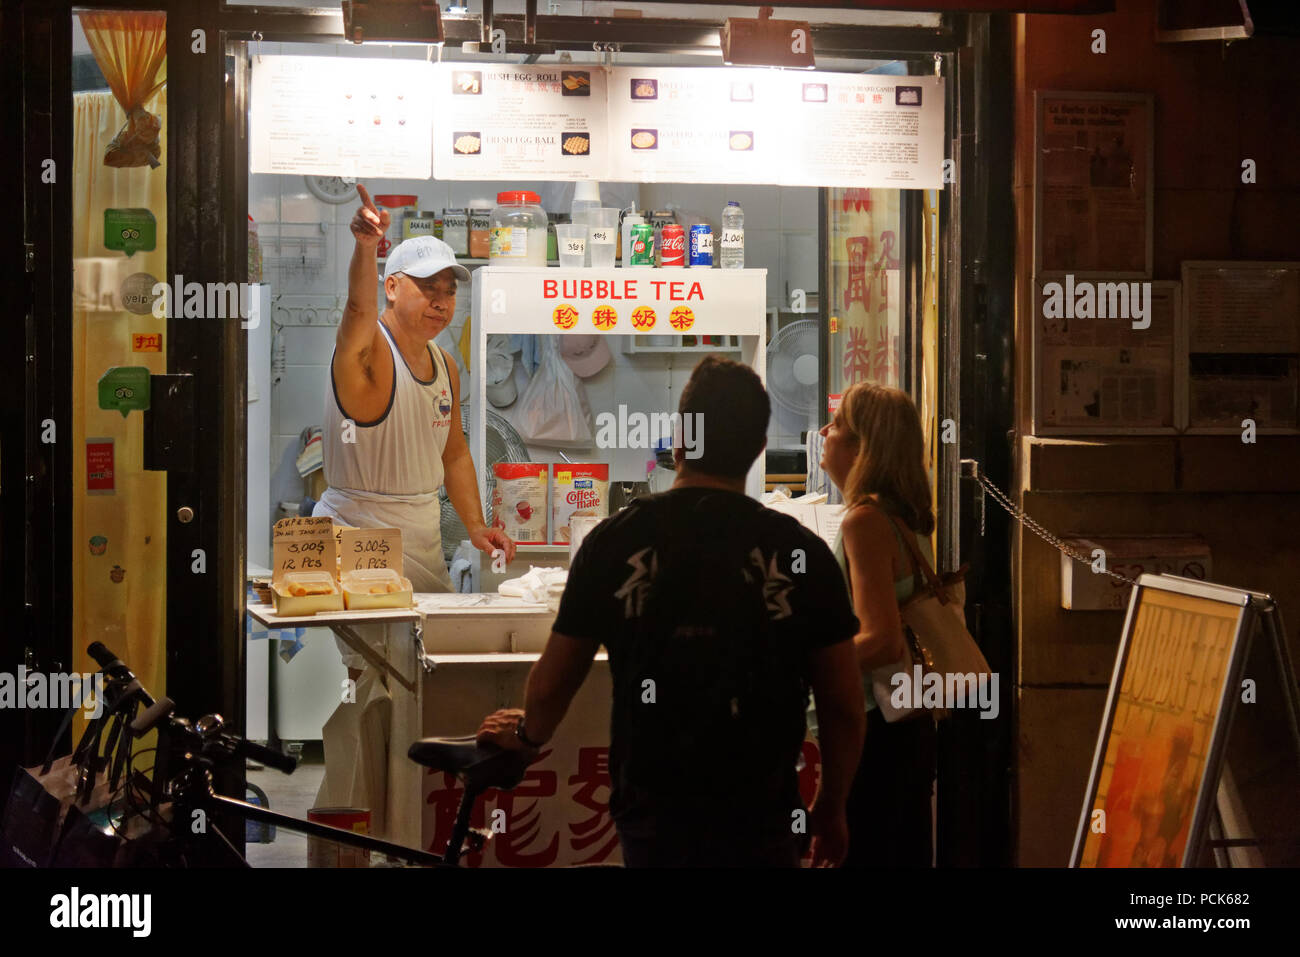 A chinese street food kiosk owner showing his menu to two customers in Montreal Chinatown on Rue de la Gauchetiere Stock Photo